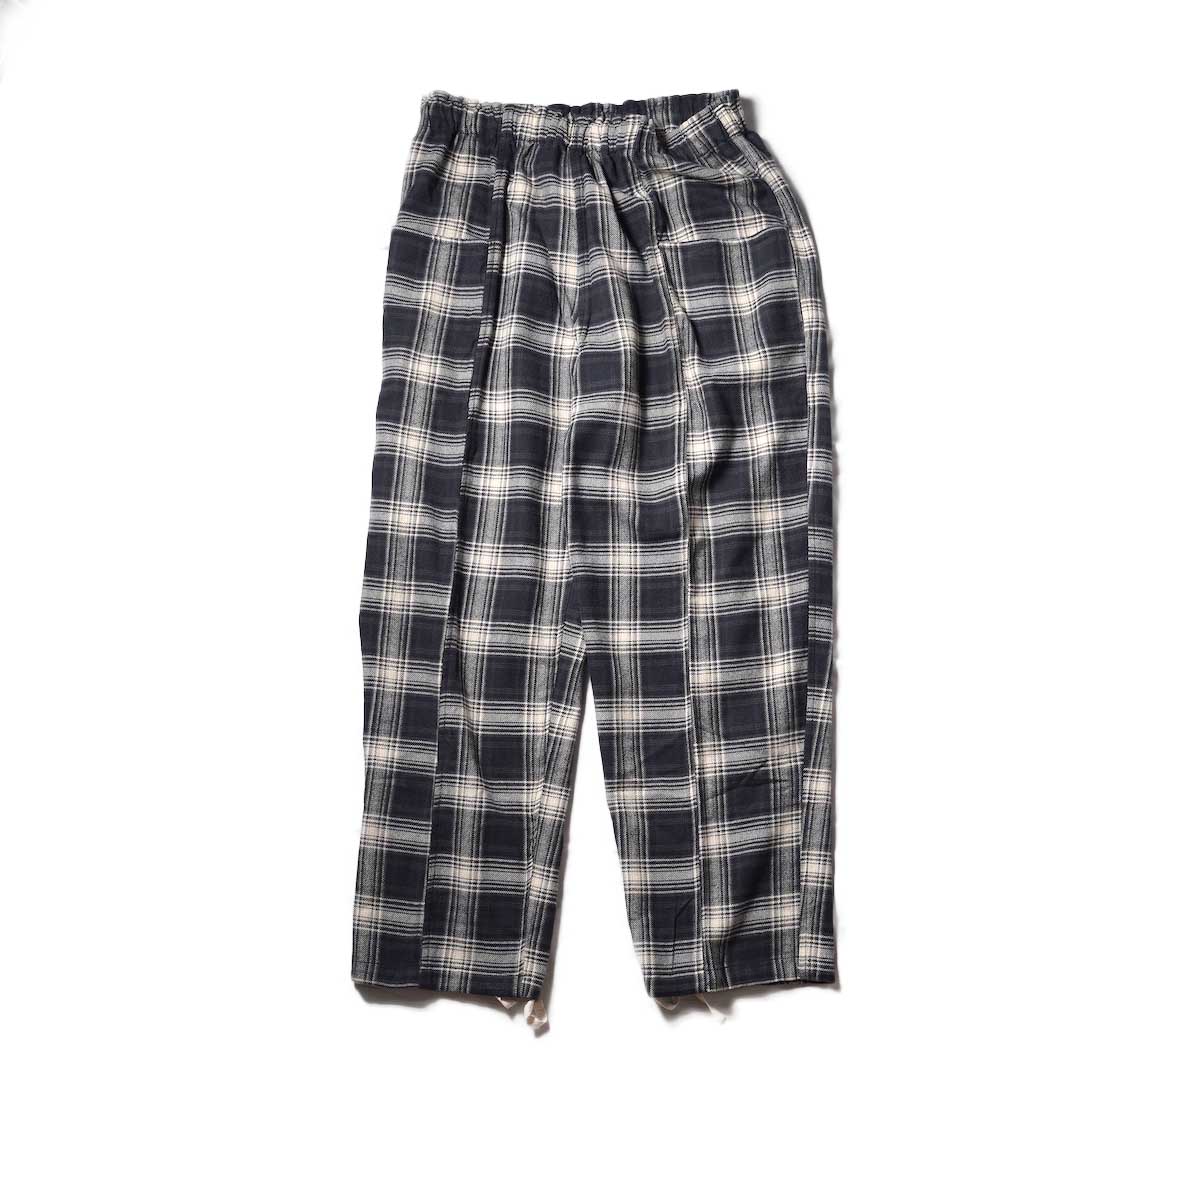 South2 West8 / ARMY STRING PANT - Twill Plaid (Navy)